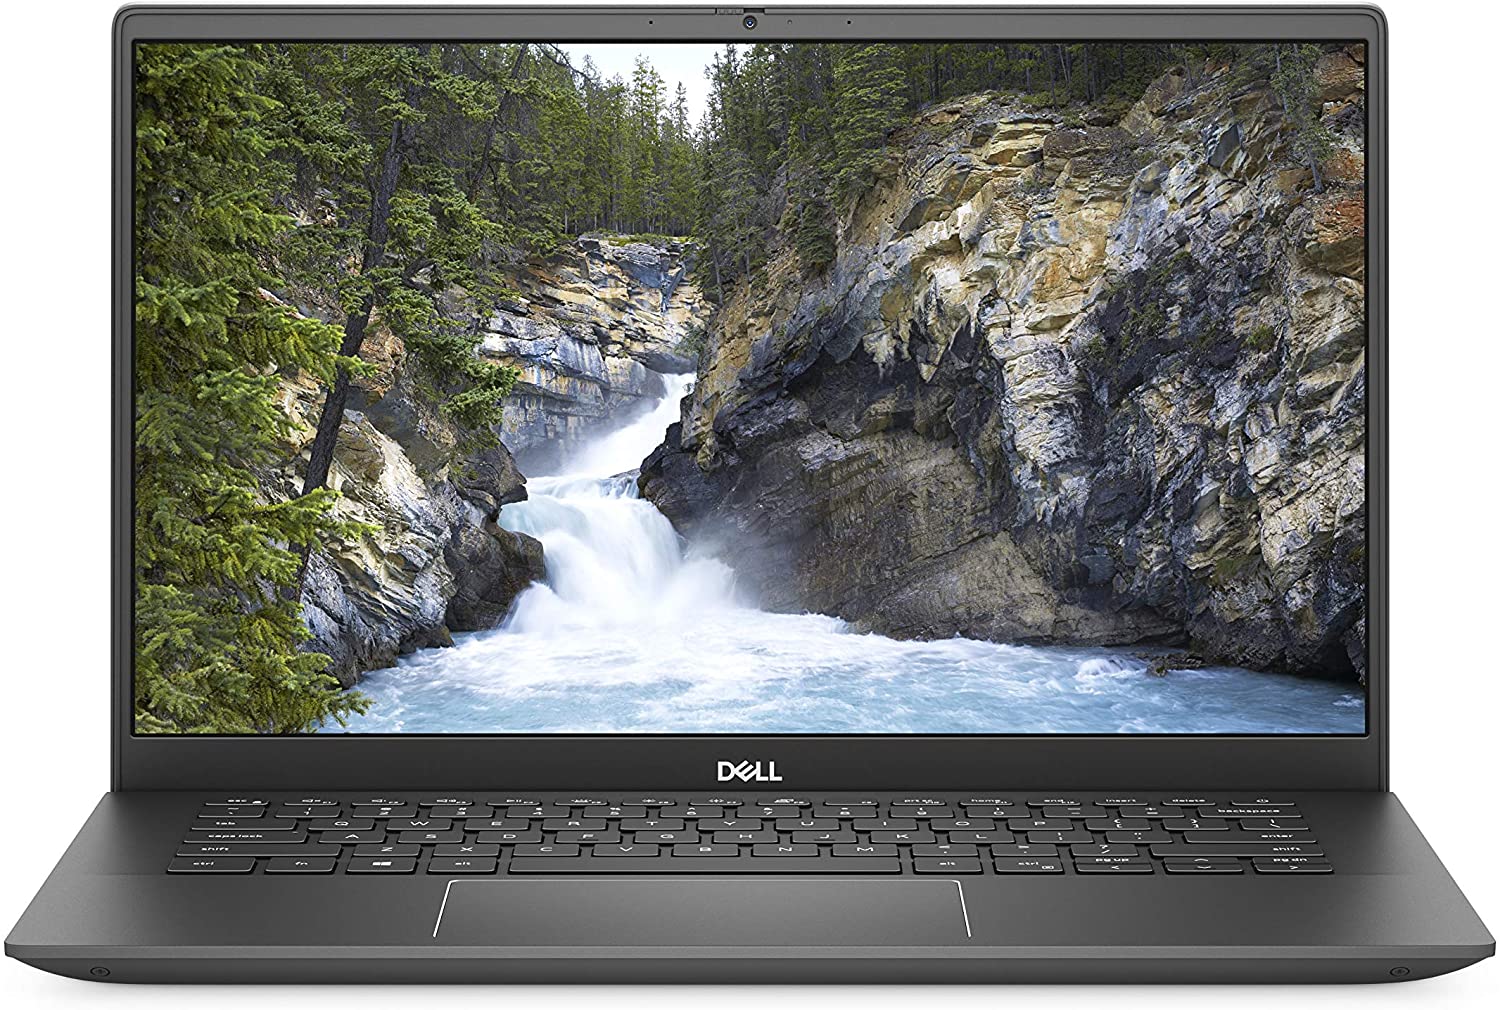 Dell Inspiron 14 5401 - Specs, Tests, and Prices | LaptopMedia.com